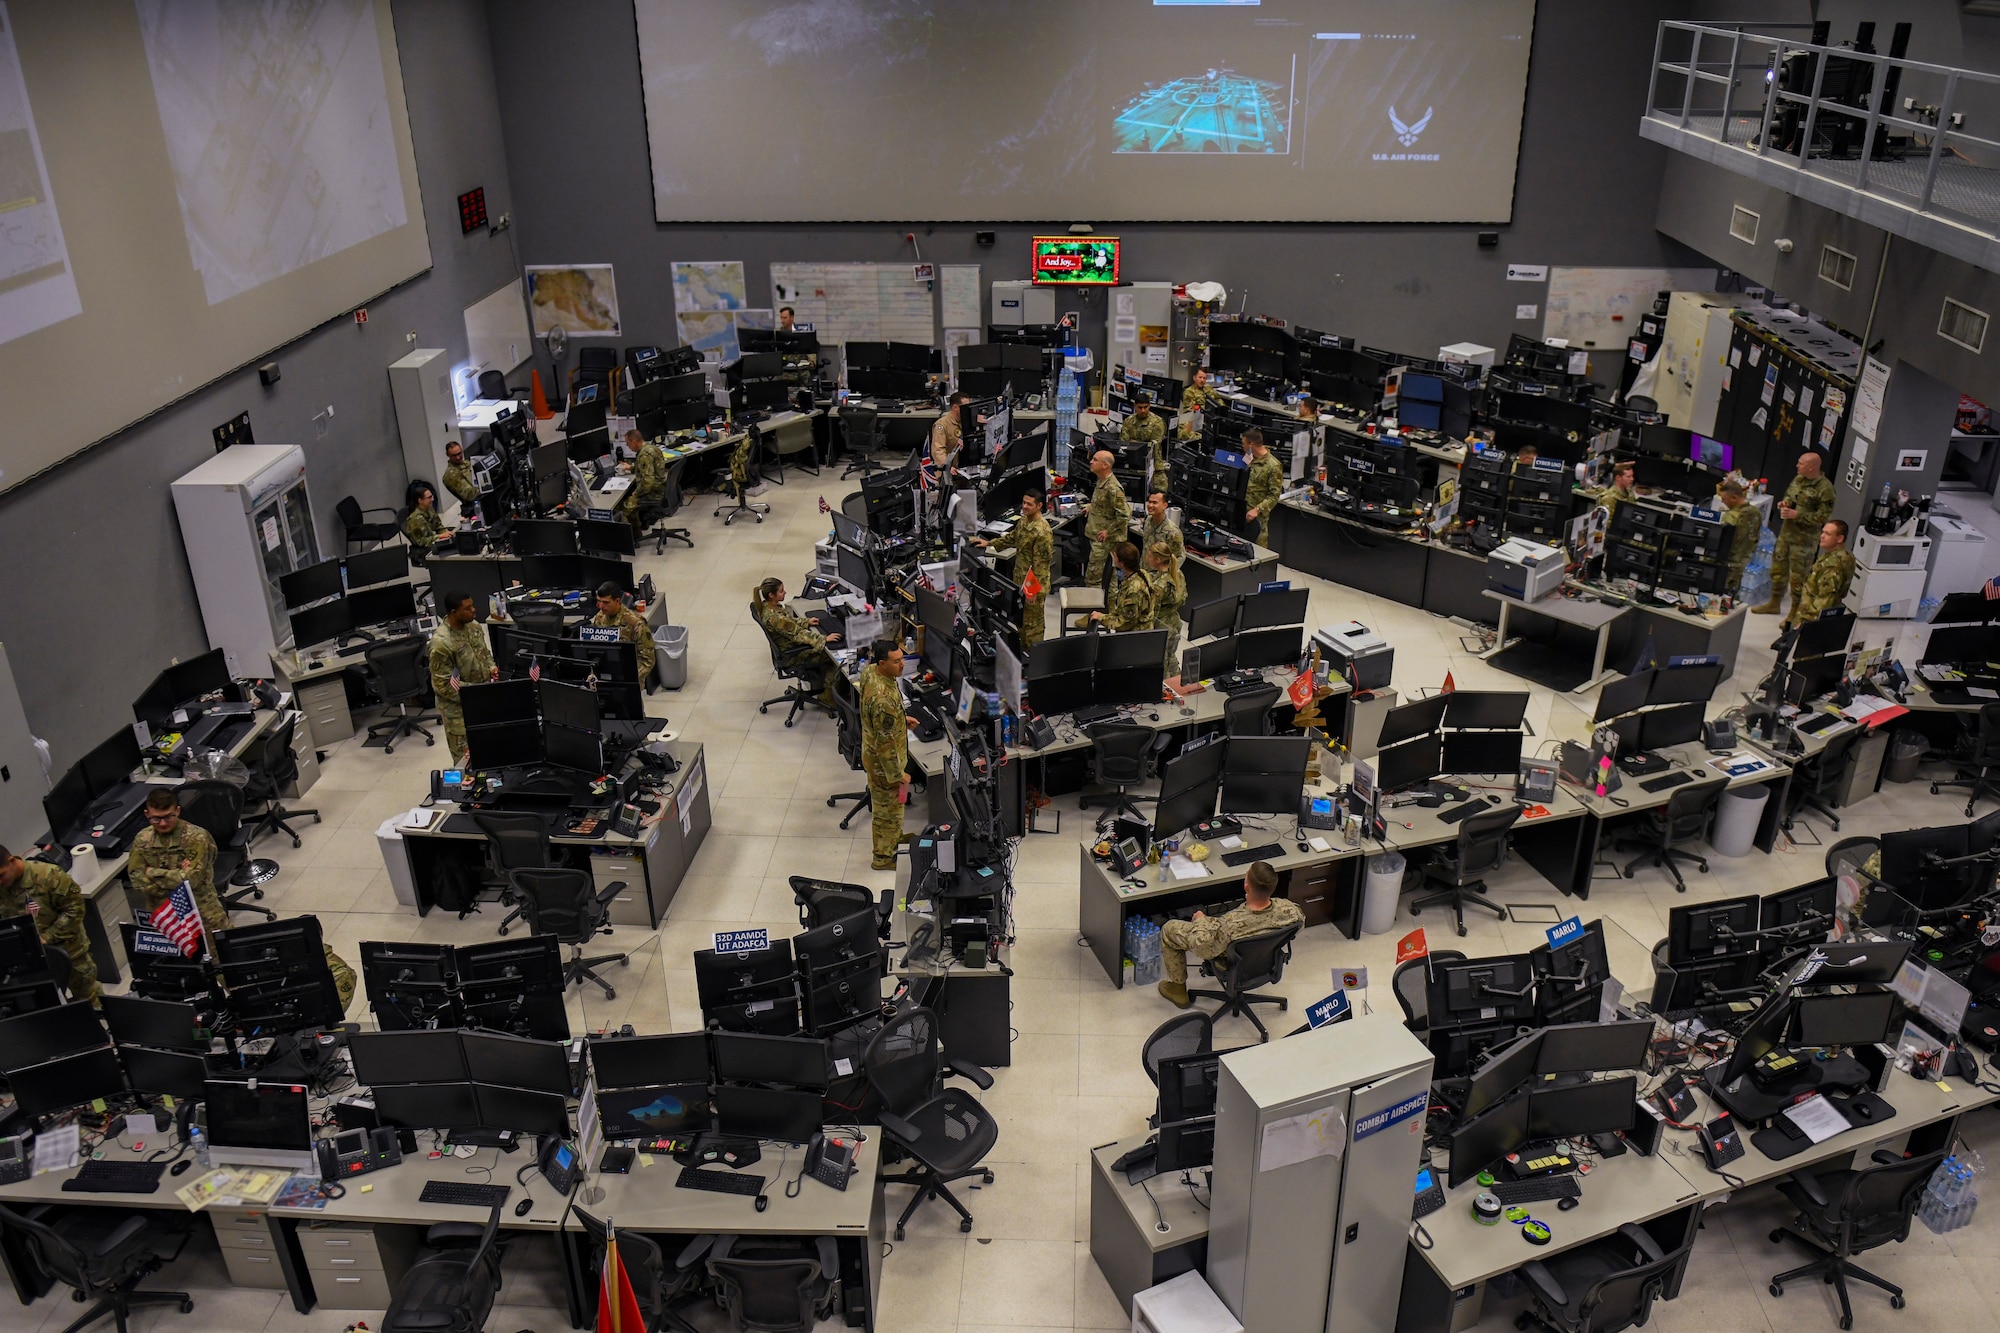 The Combined Air Operations Center is an area filled with computers